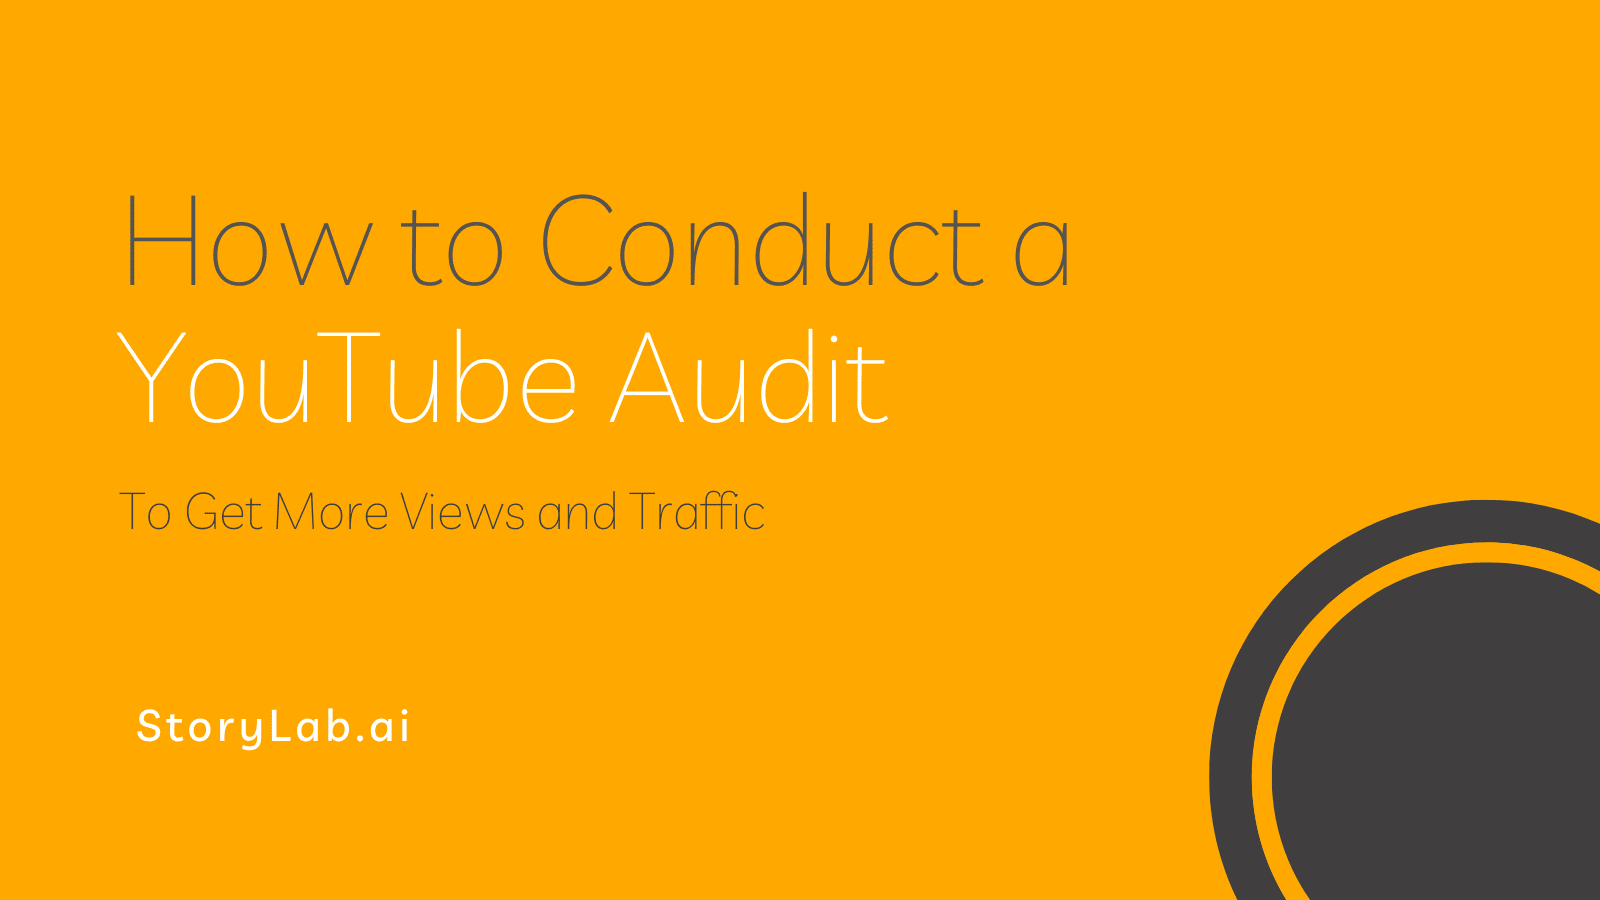 How to Conduct a YouTube Audit to Get More Views and Traffic